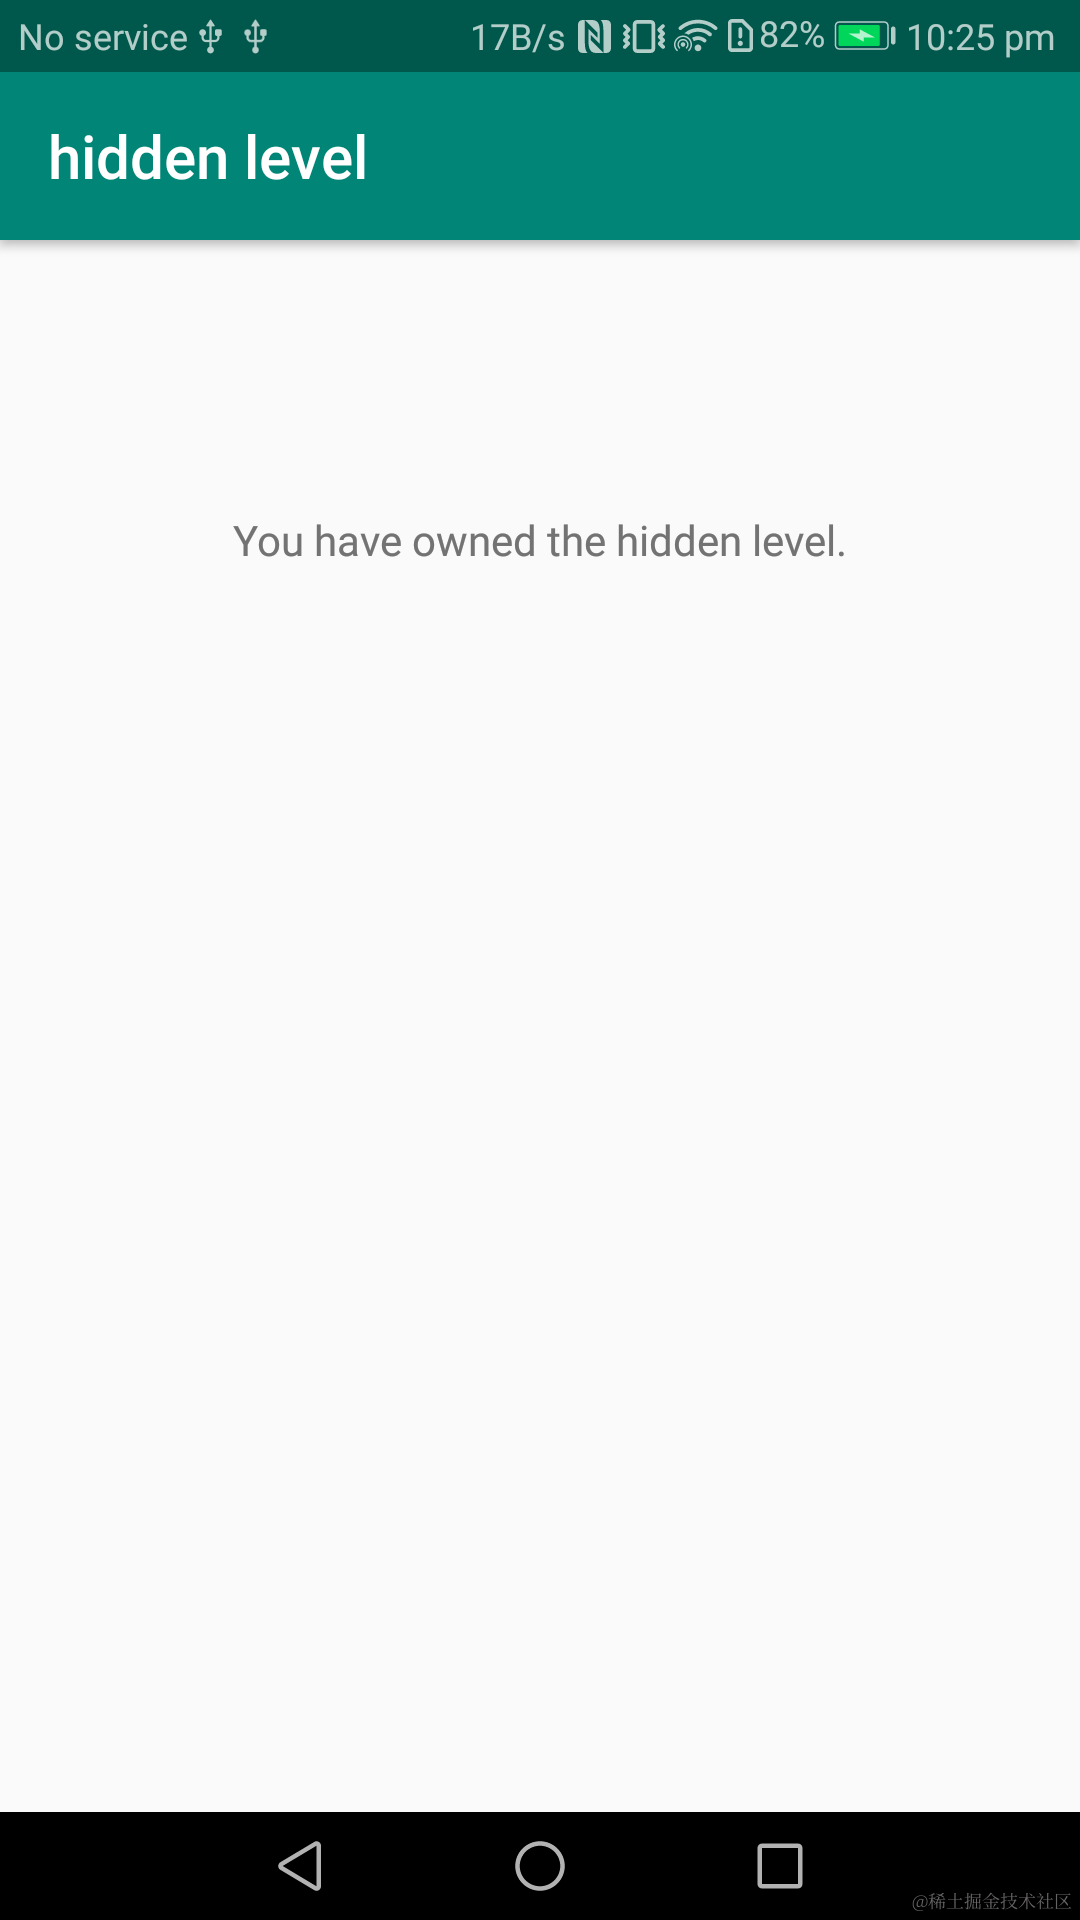 hidden level have been purchased